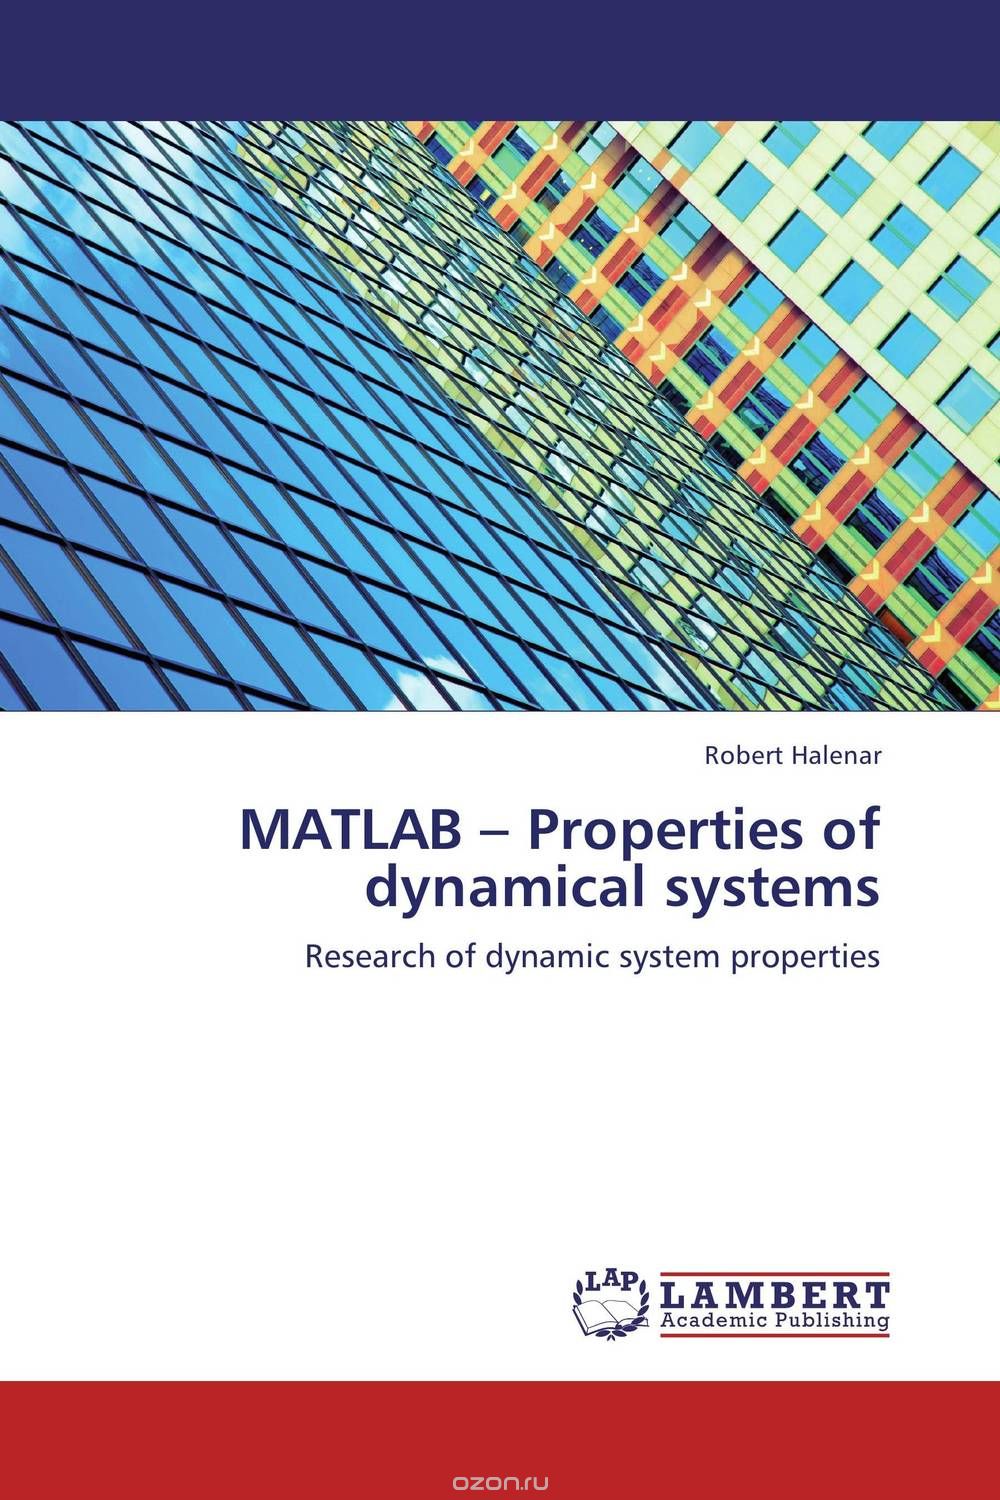 MATLAB – Properties of dynamical systems